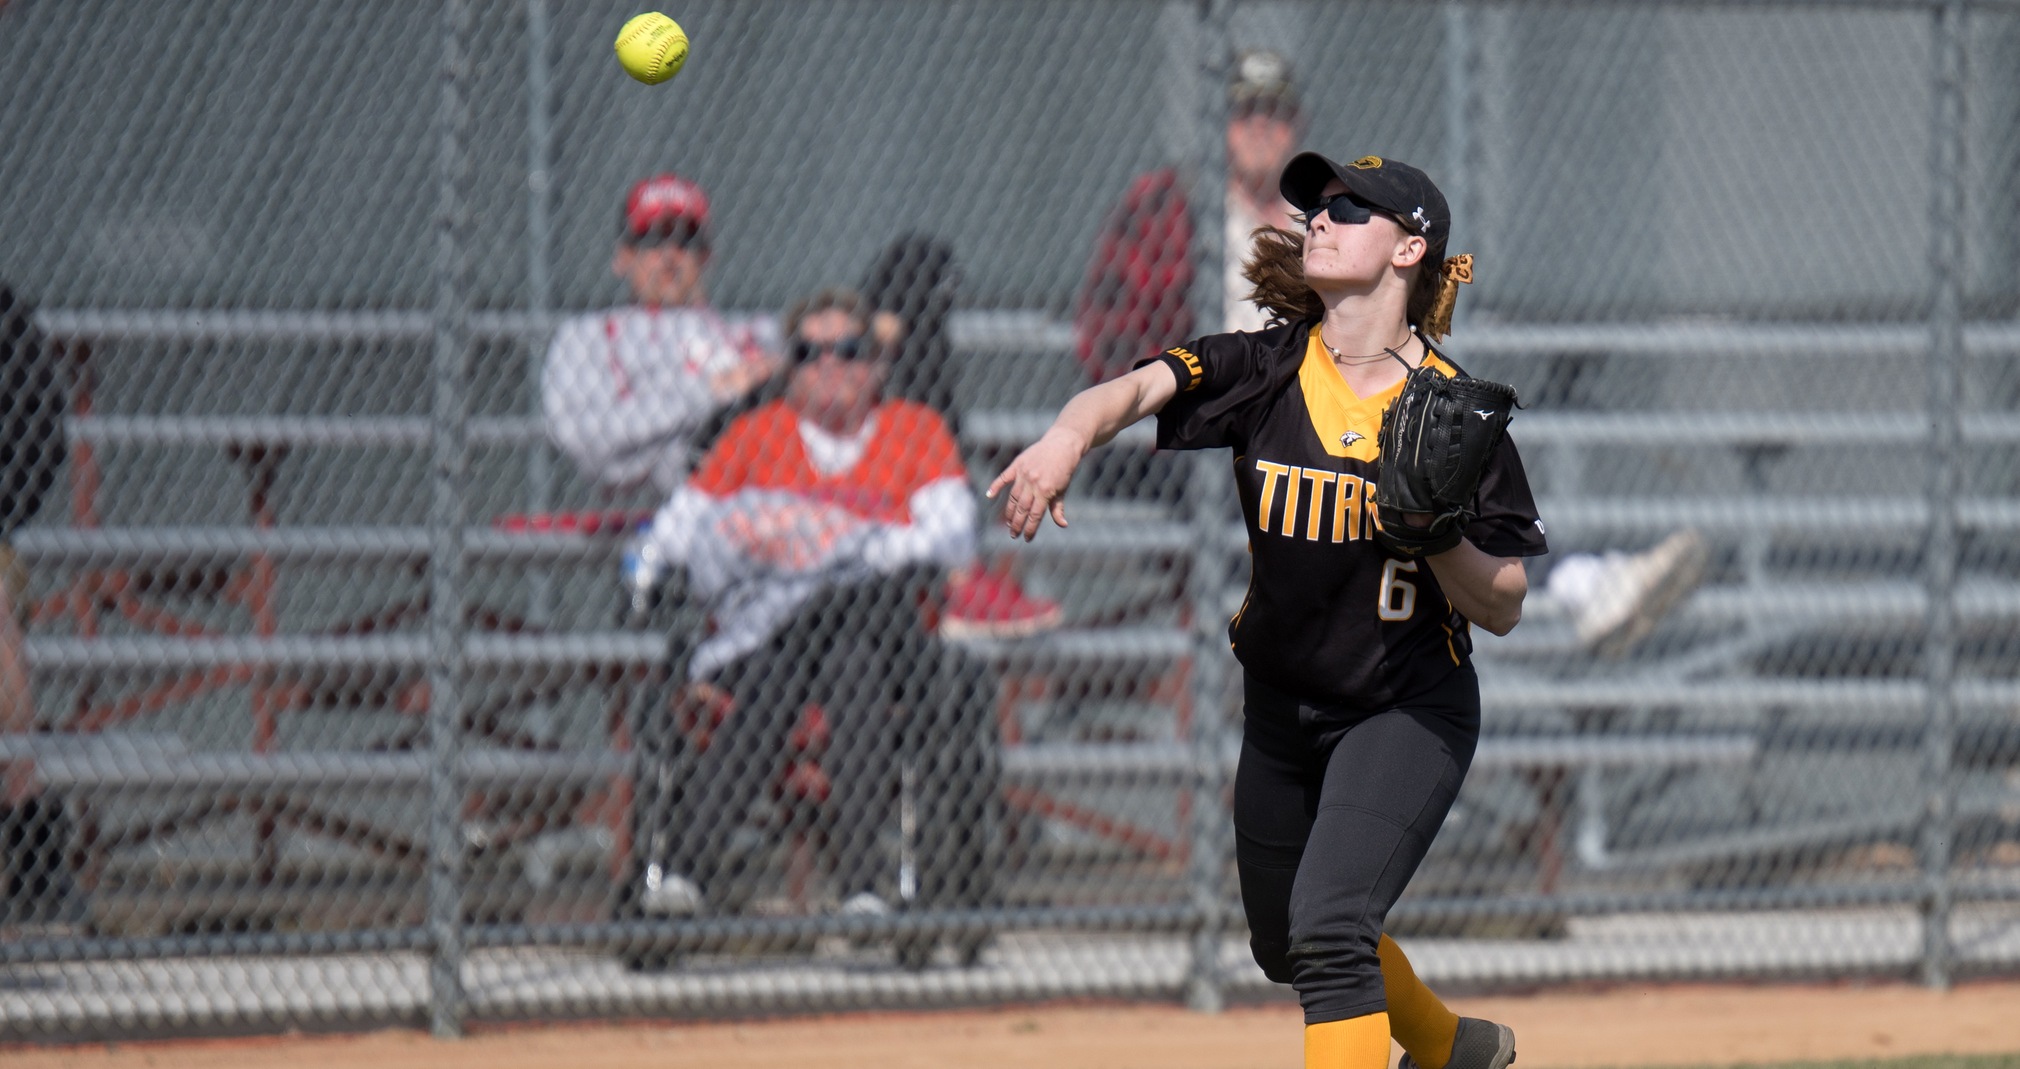 Natalie Dillon had three hits, including a triple, and scored three runs during the doubleheader with the Muskies.